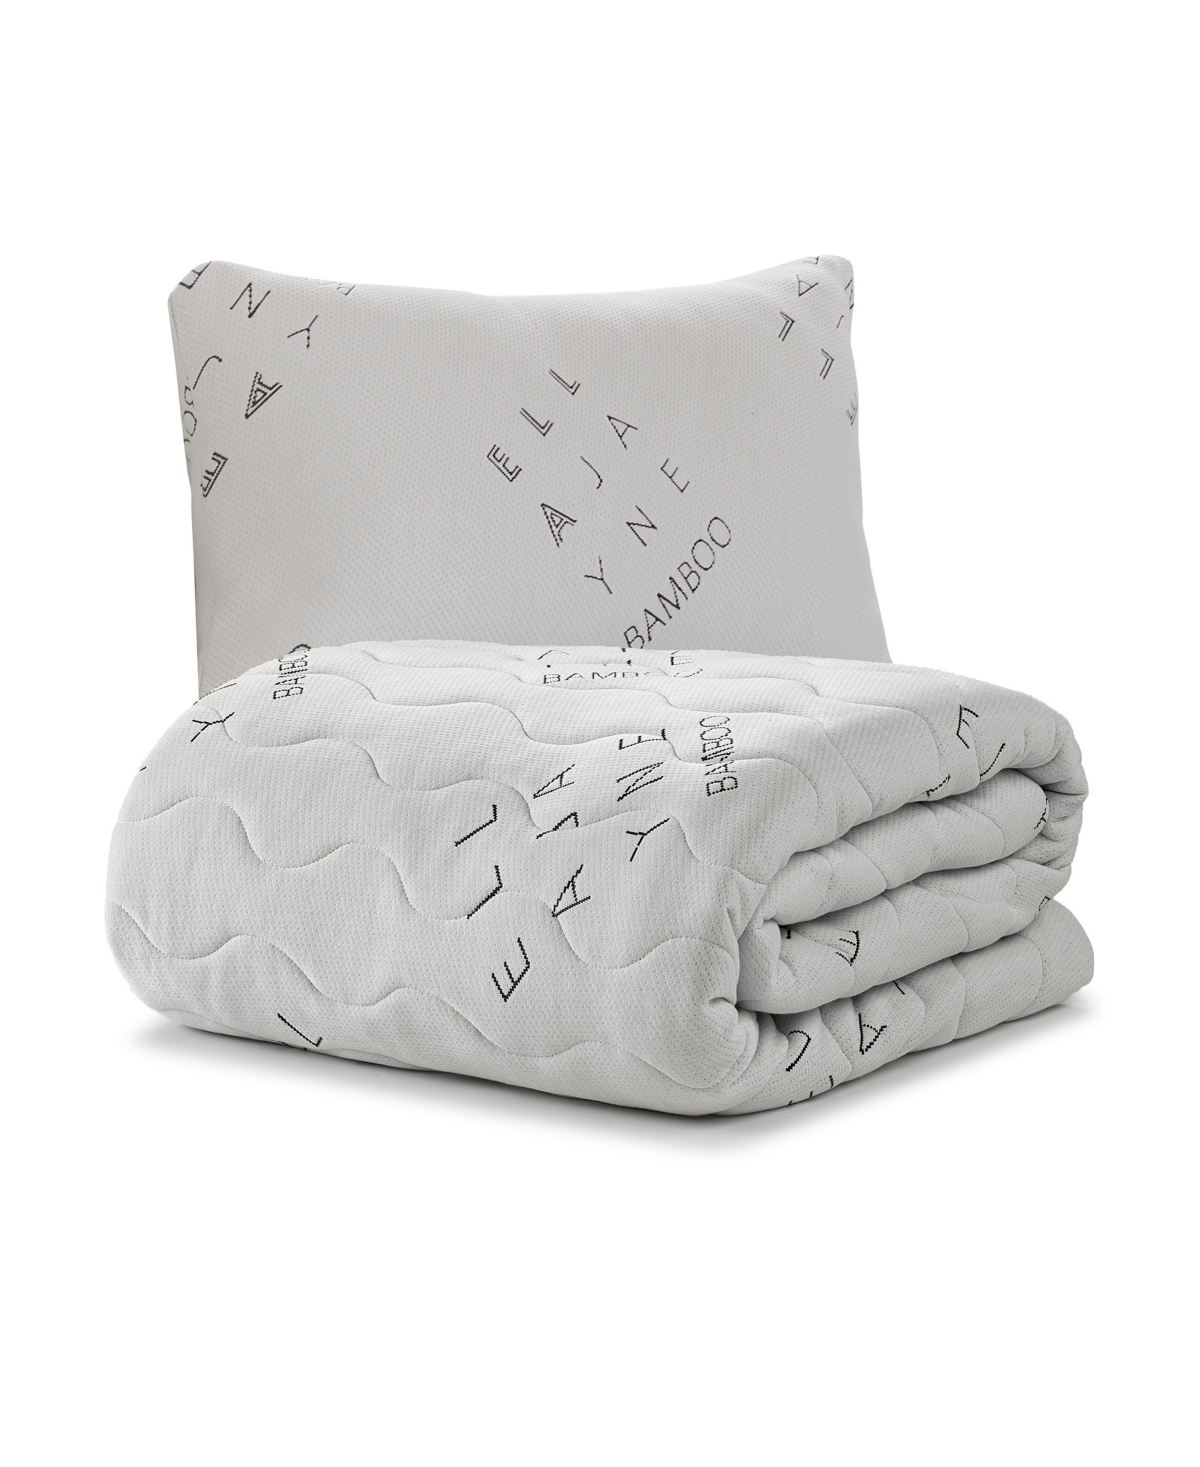 Ella Jayne Viscose From Bamboo Pillow And Topper Bedding Bundle, Twin Xl In White